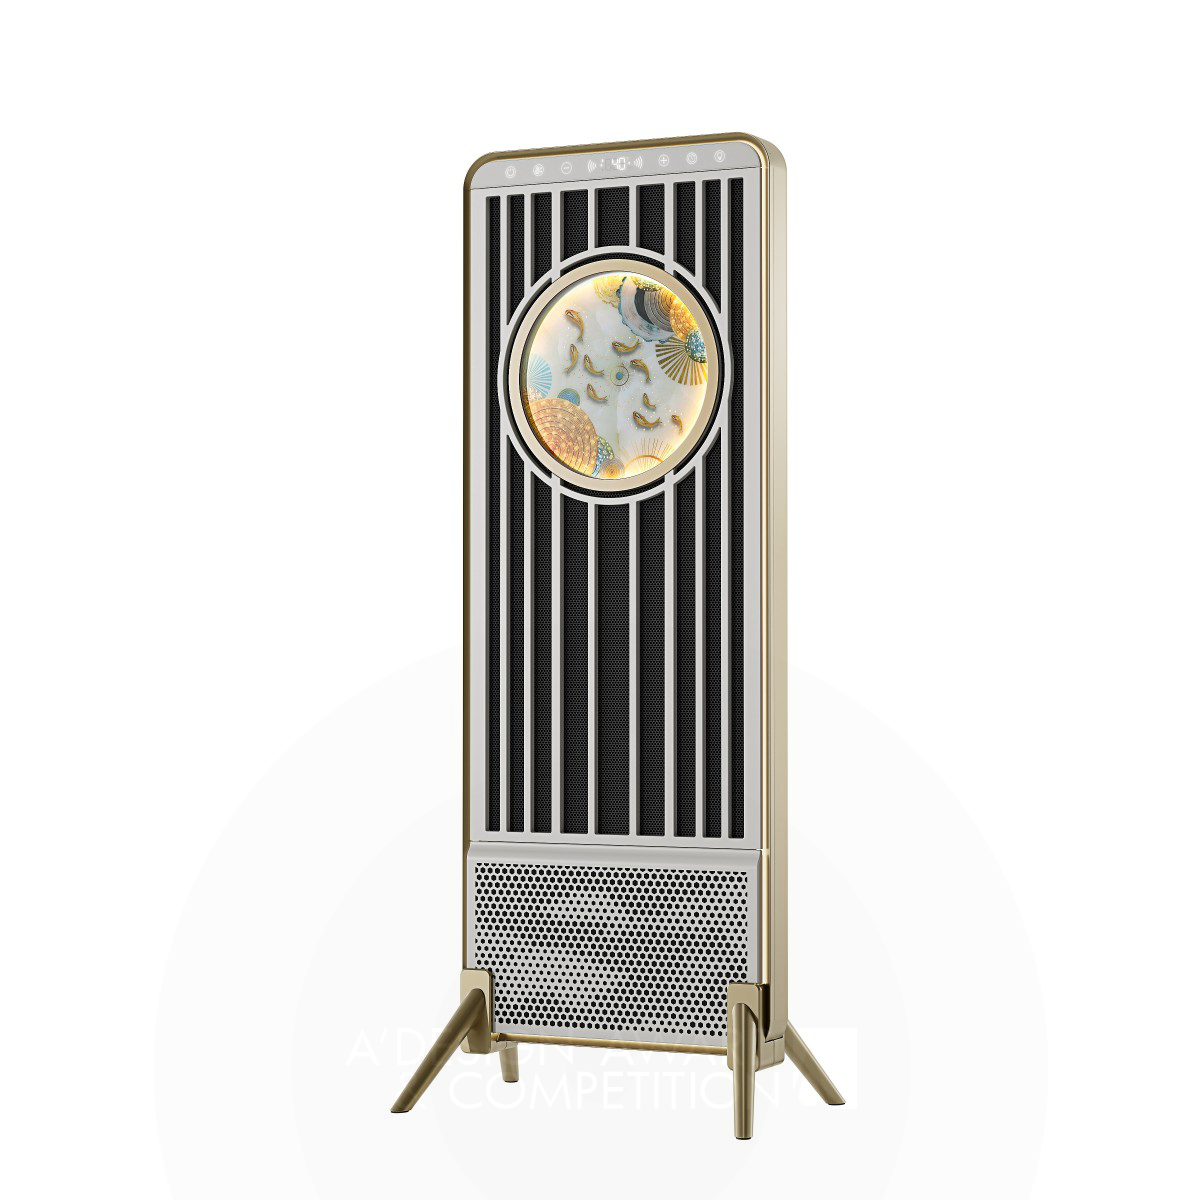 Hua Ping Electric Heater by Jipin Industrial Design Co., Ltd